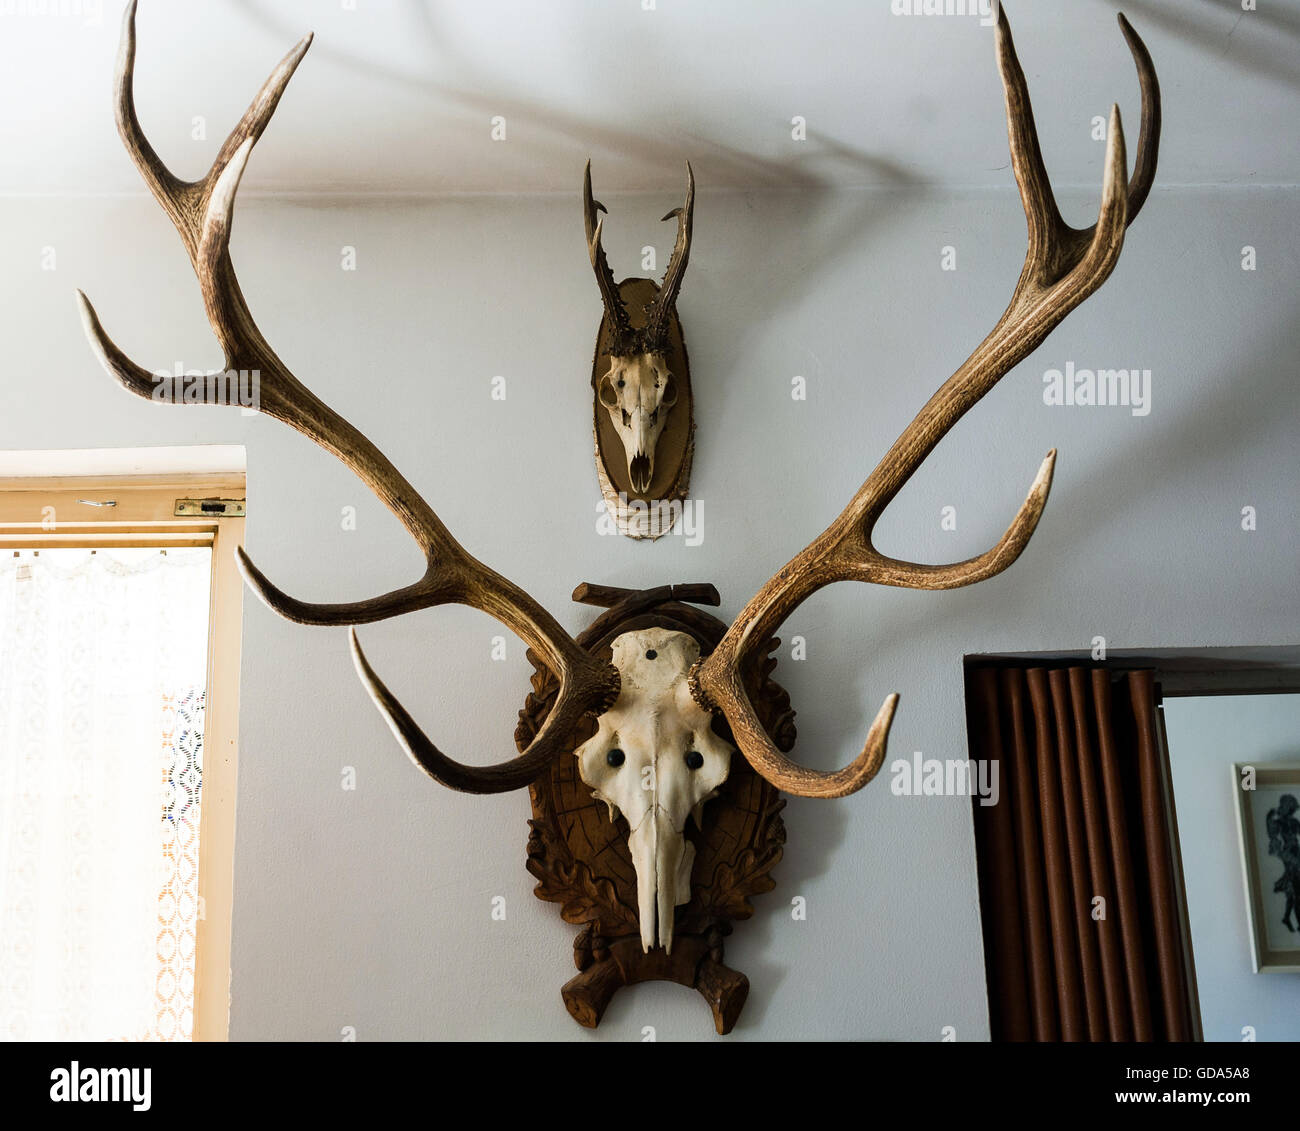 Deer and goat skulls on a wall Stock Photo